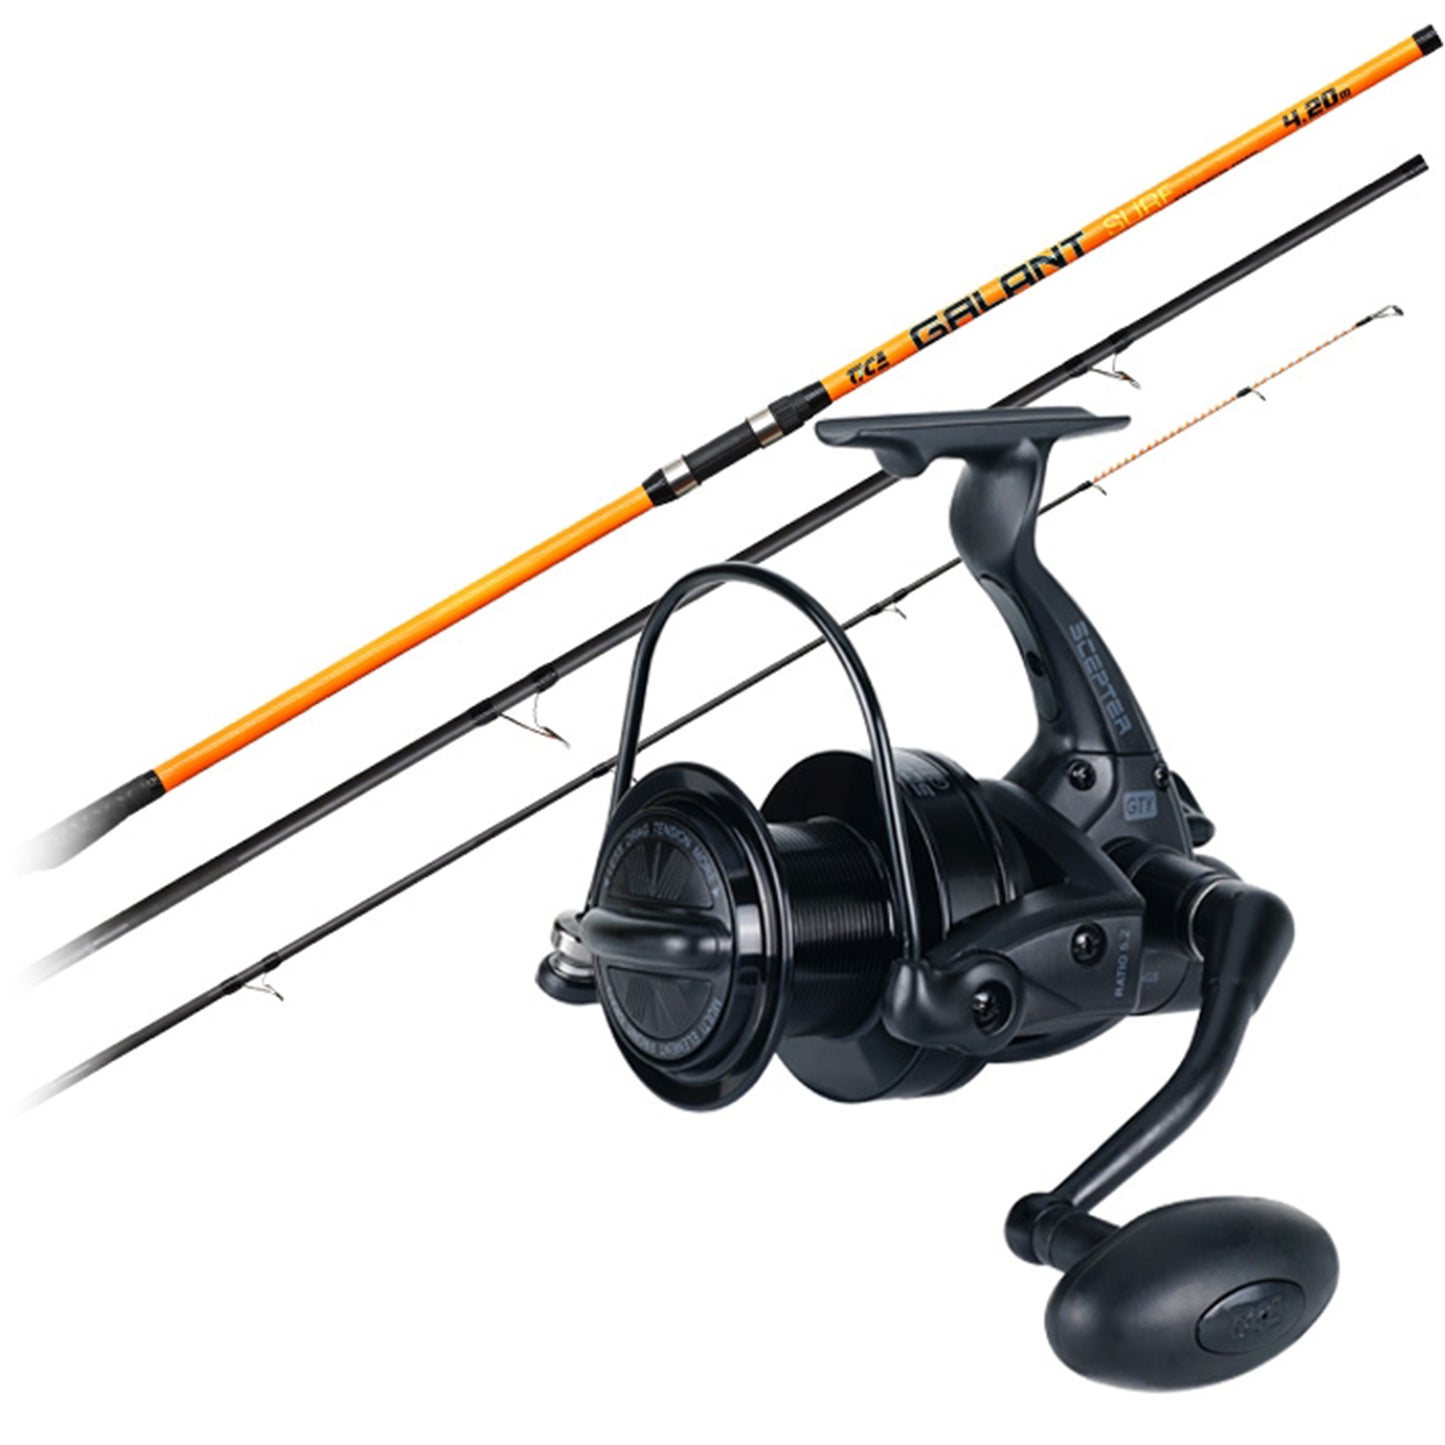 Tica Sceptor and Galant Surfcasting Combo Set